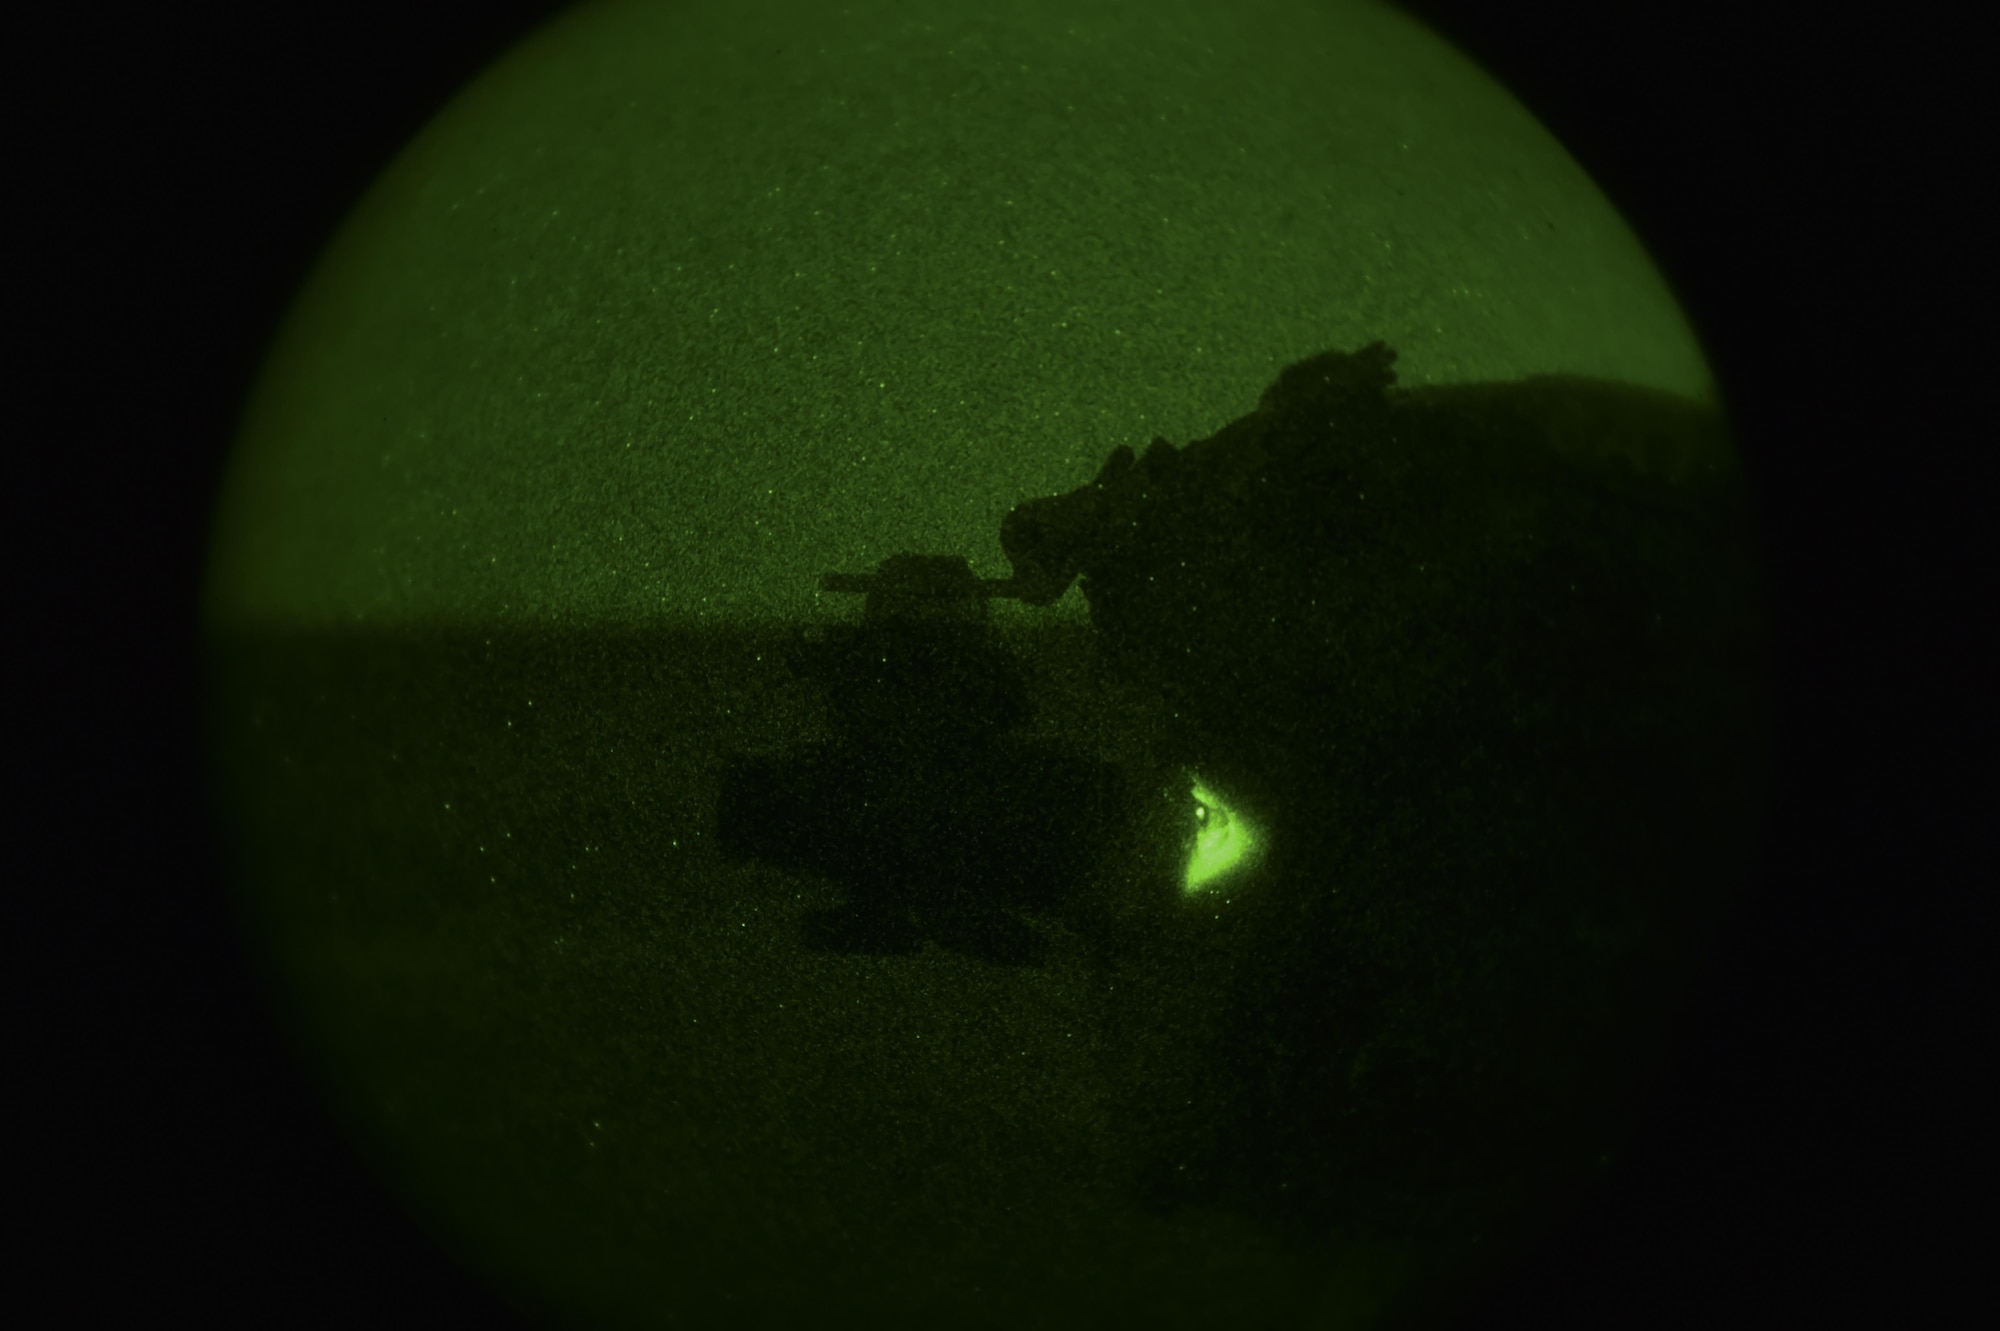 A Soldier with the 1st Battalion, 10th Special Forces Group, uses night vision goggles to participate in call-for-fire training at the Eglin Range, Eglin Air Force Base, Fla., March 17, 2017. The 1st Special Operations Support Squadron Operational Support Joint Office coordinates two-week long training programs for Army, Navy and Marine special operations forces that provides live-fire ranges and familiarizes them with Air Force Special Operations Command aircraft to ensure global readiness. (U.S. Air Force photo by Airman 1st Class Joseph Pick)